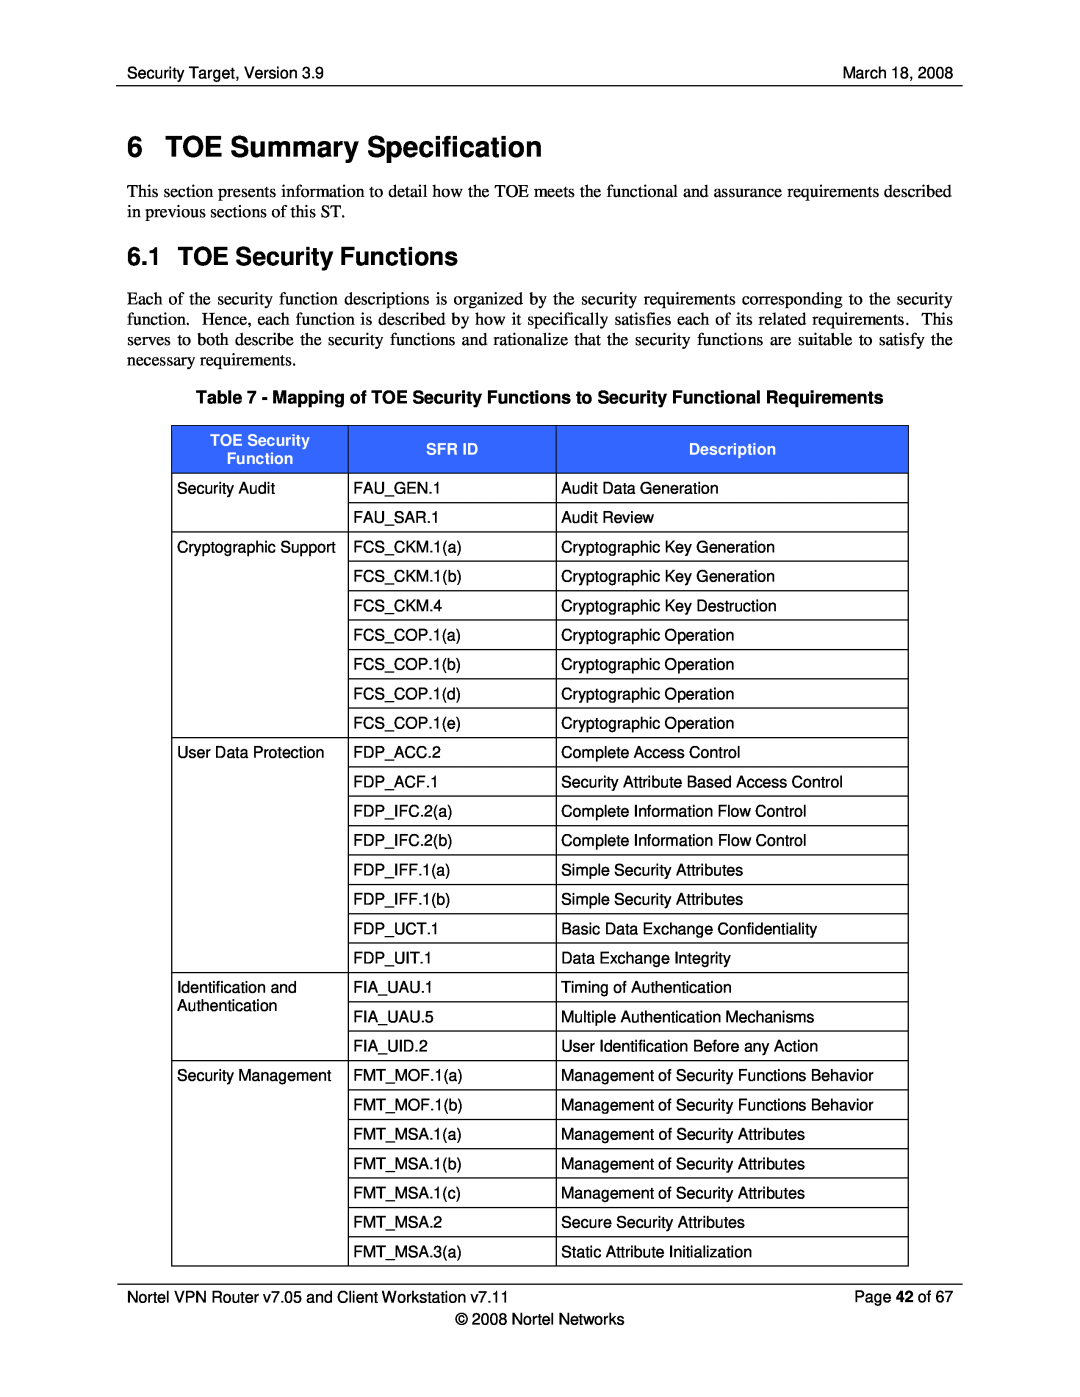 Nortel Networks 7.05, 7.11 manual TOE Summary Specification, TOE Security Functions 